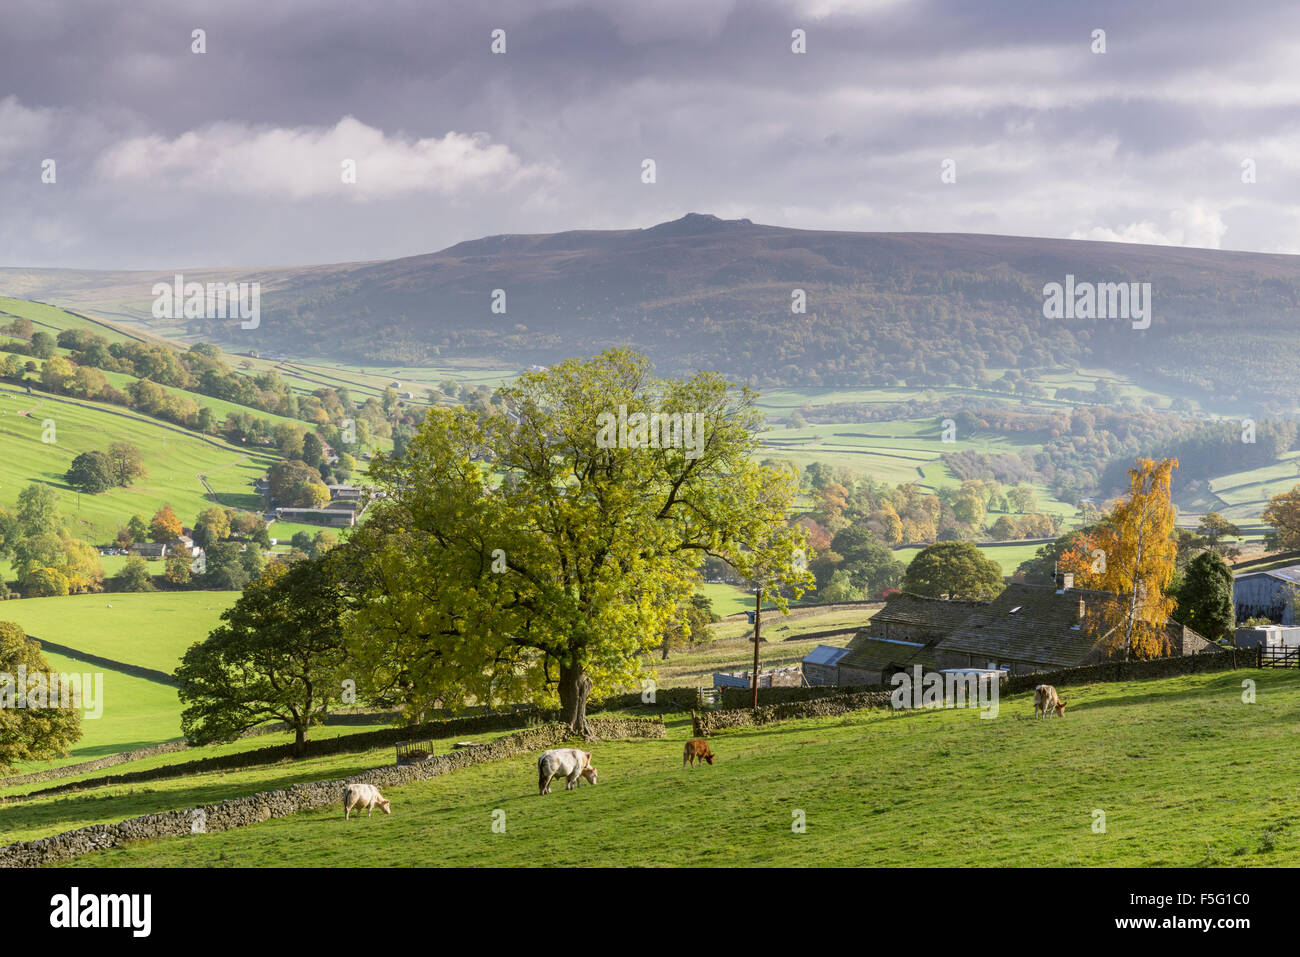 Appletree Dorf und Simons Sitz in Wharfedale, The Yorkshire Dales, England Stockfoto